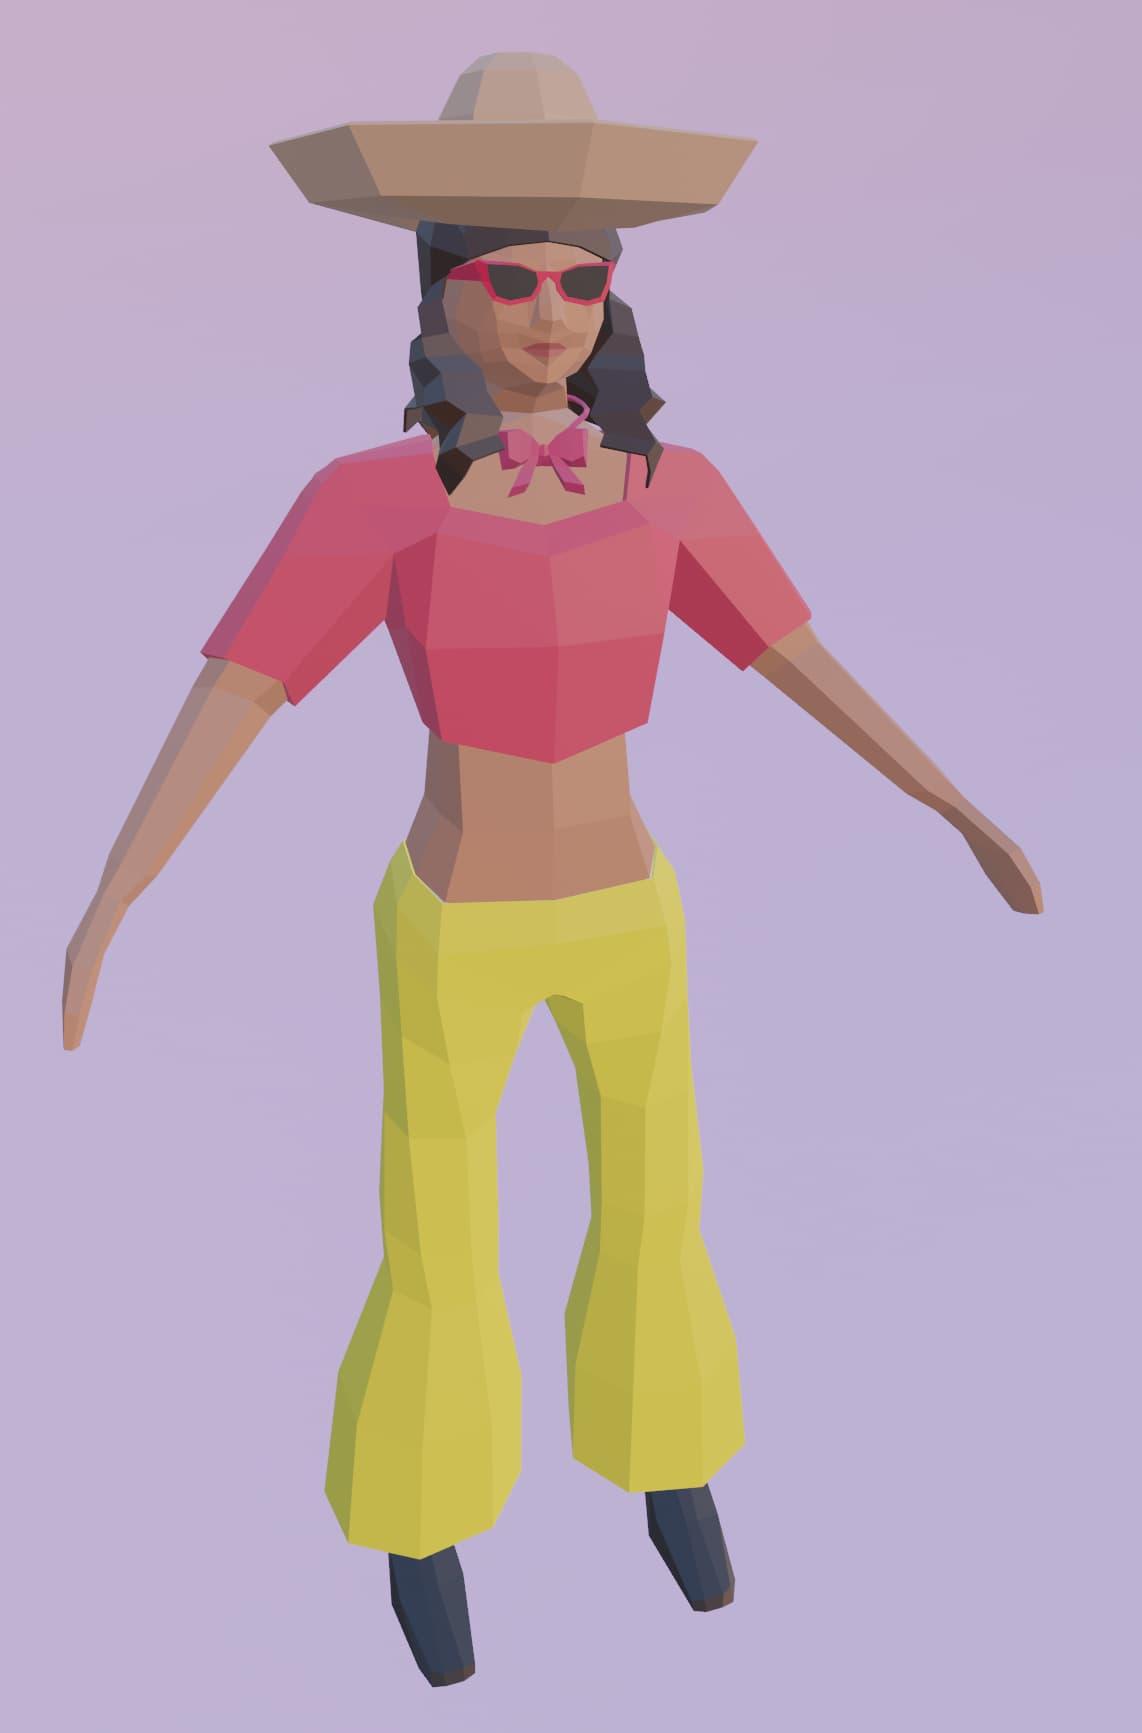 A 3D model of a Latin-American woman with black curly hair, wearing a sombrero, sunglasses, a pink bowtie, a pink crop top, yellow bell bottoms, and black shoes